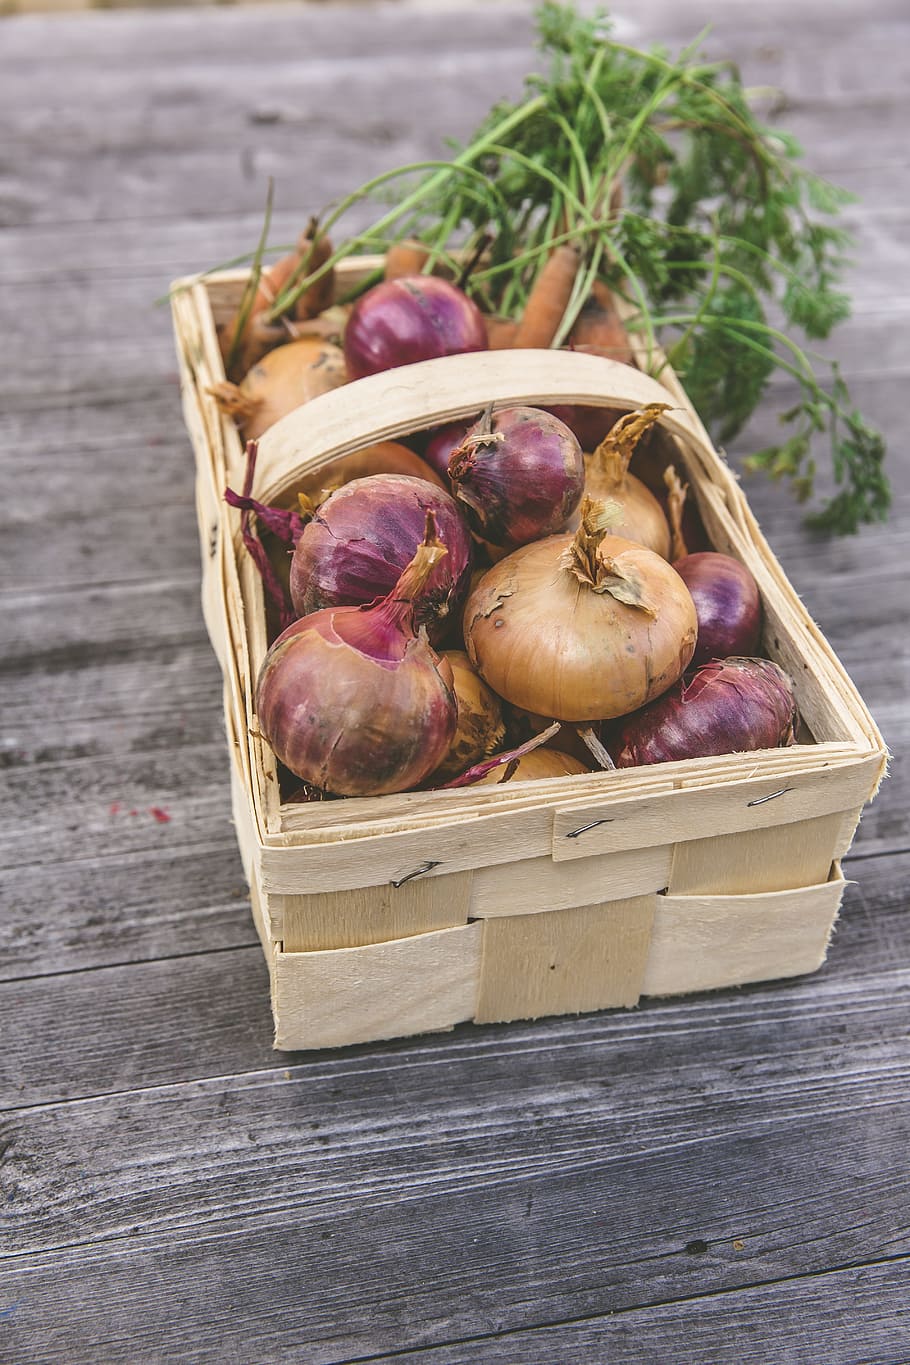 shallots in basket, vegetables, harvest, cultivation, thanksgiving, garden, frisch, onions, carrots, colorful